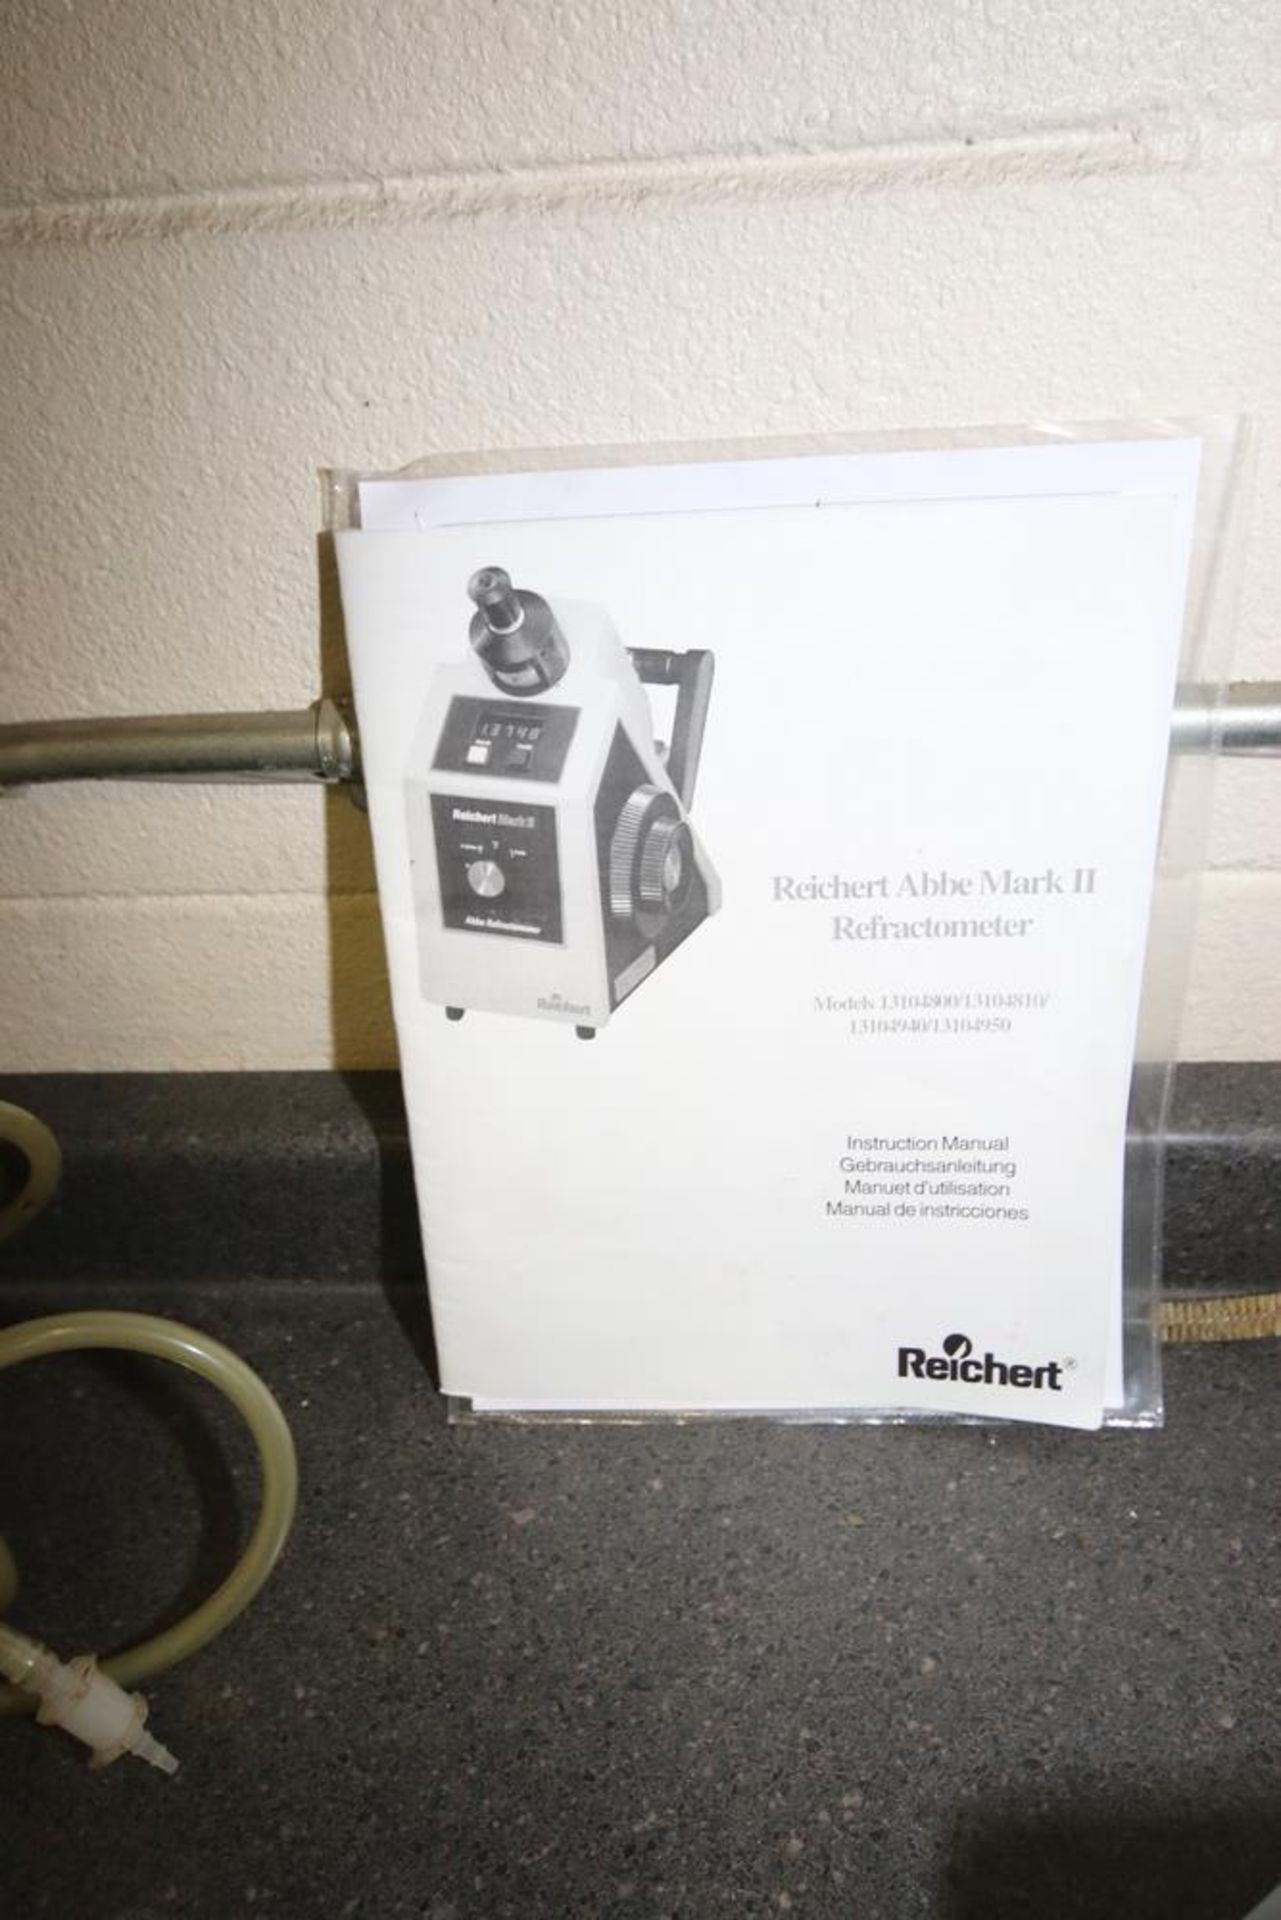 Reichert Leica Abbe Mark II Refractometer, M/N 13104800, with Sight Scope and Instruction Manual - Image 3 of 3